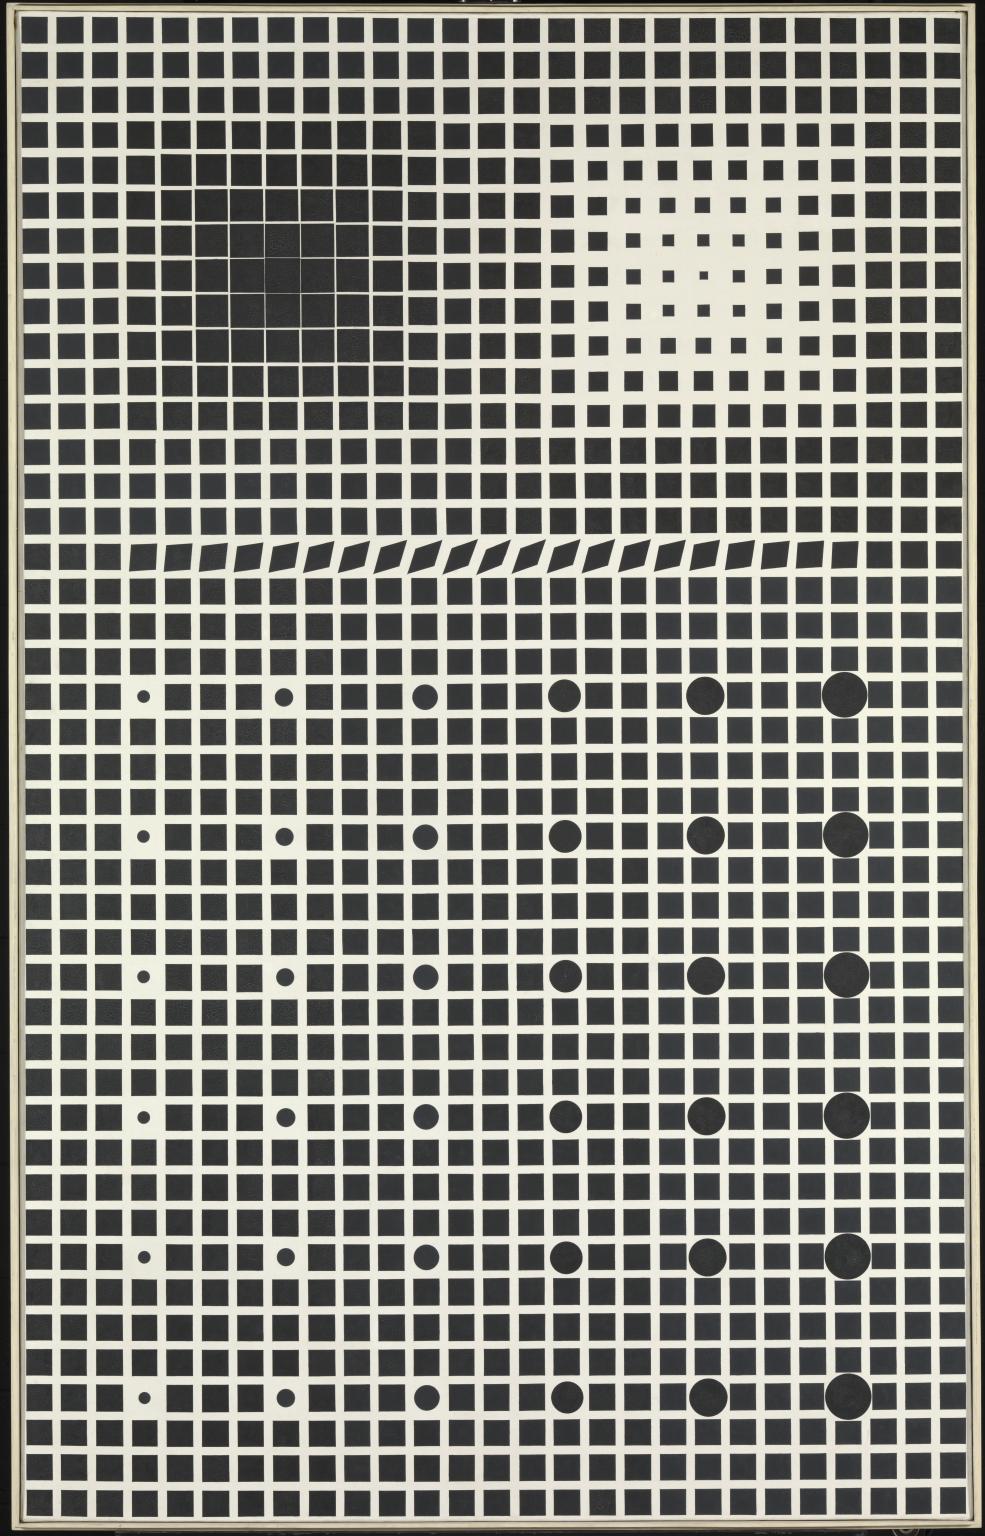 Supernovae by Victor Vasarely - 1959 - 1961 - 244 x 154 cm private collection